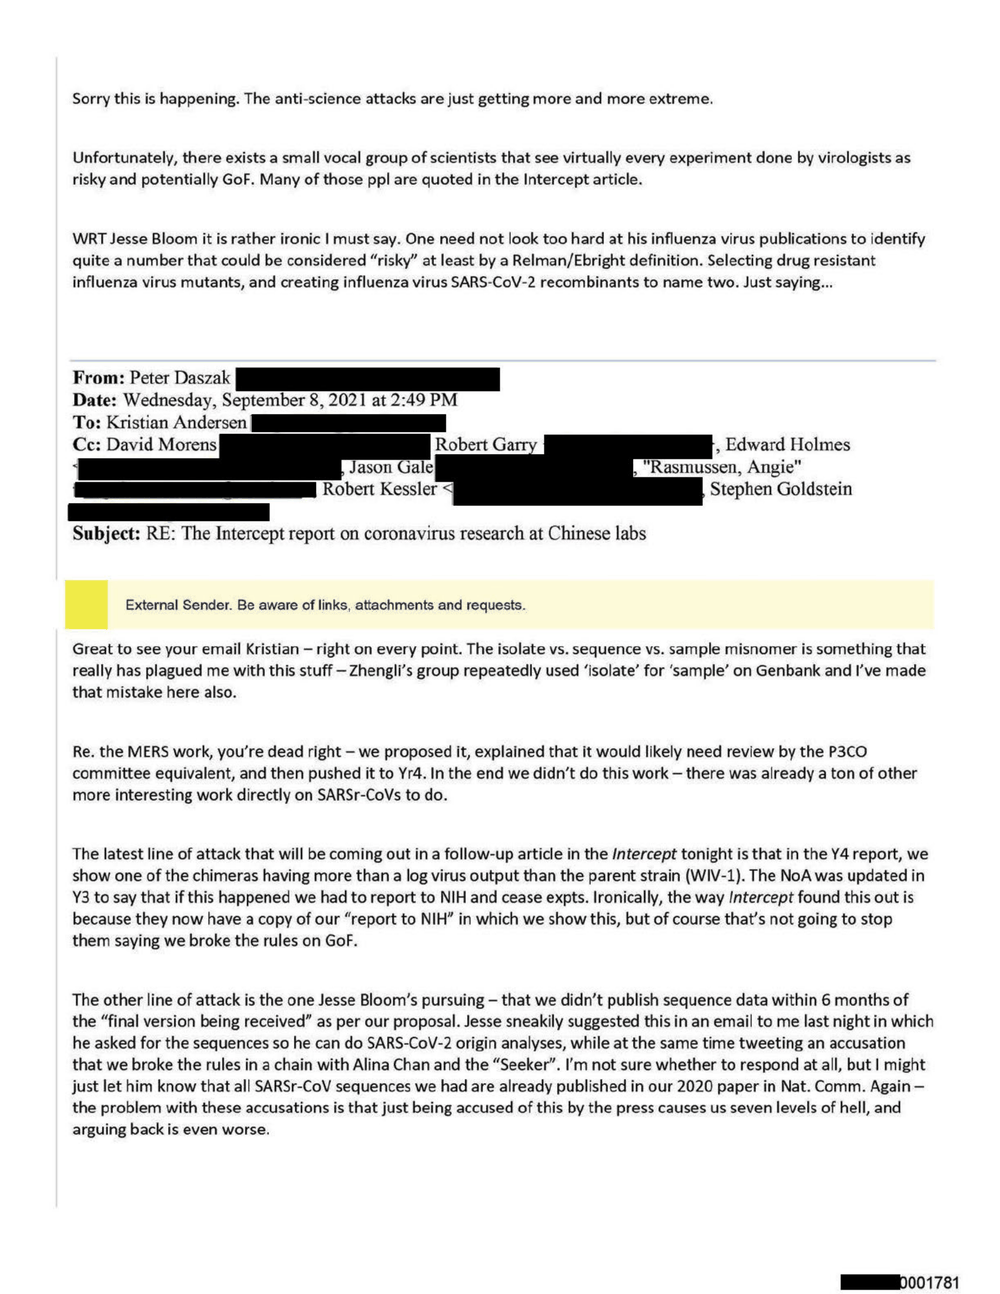 Page 8 from David Morens NIH Emails Redacted